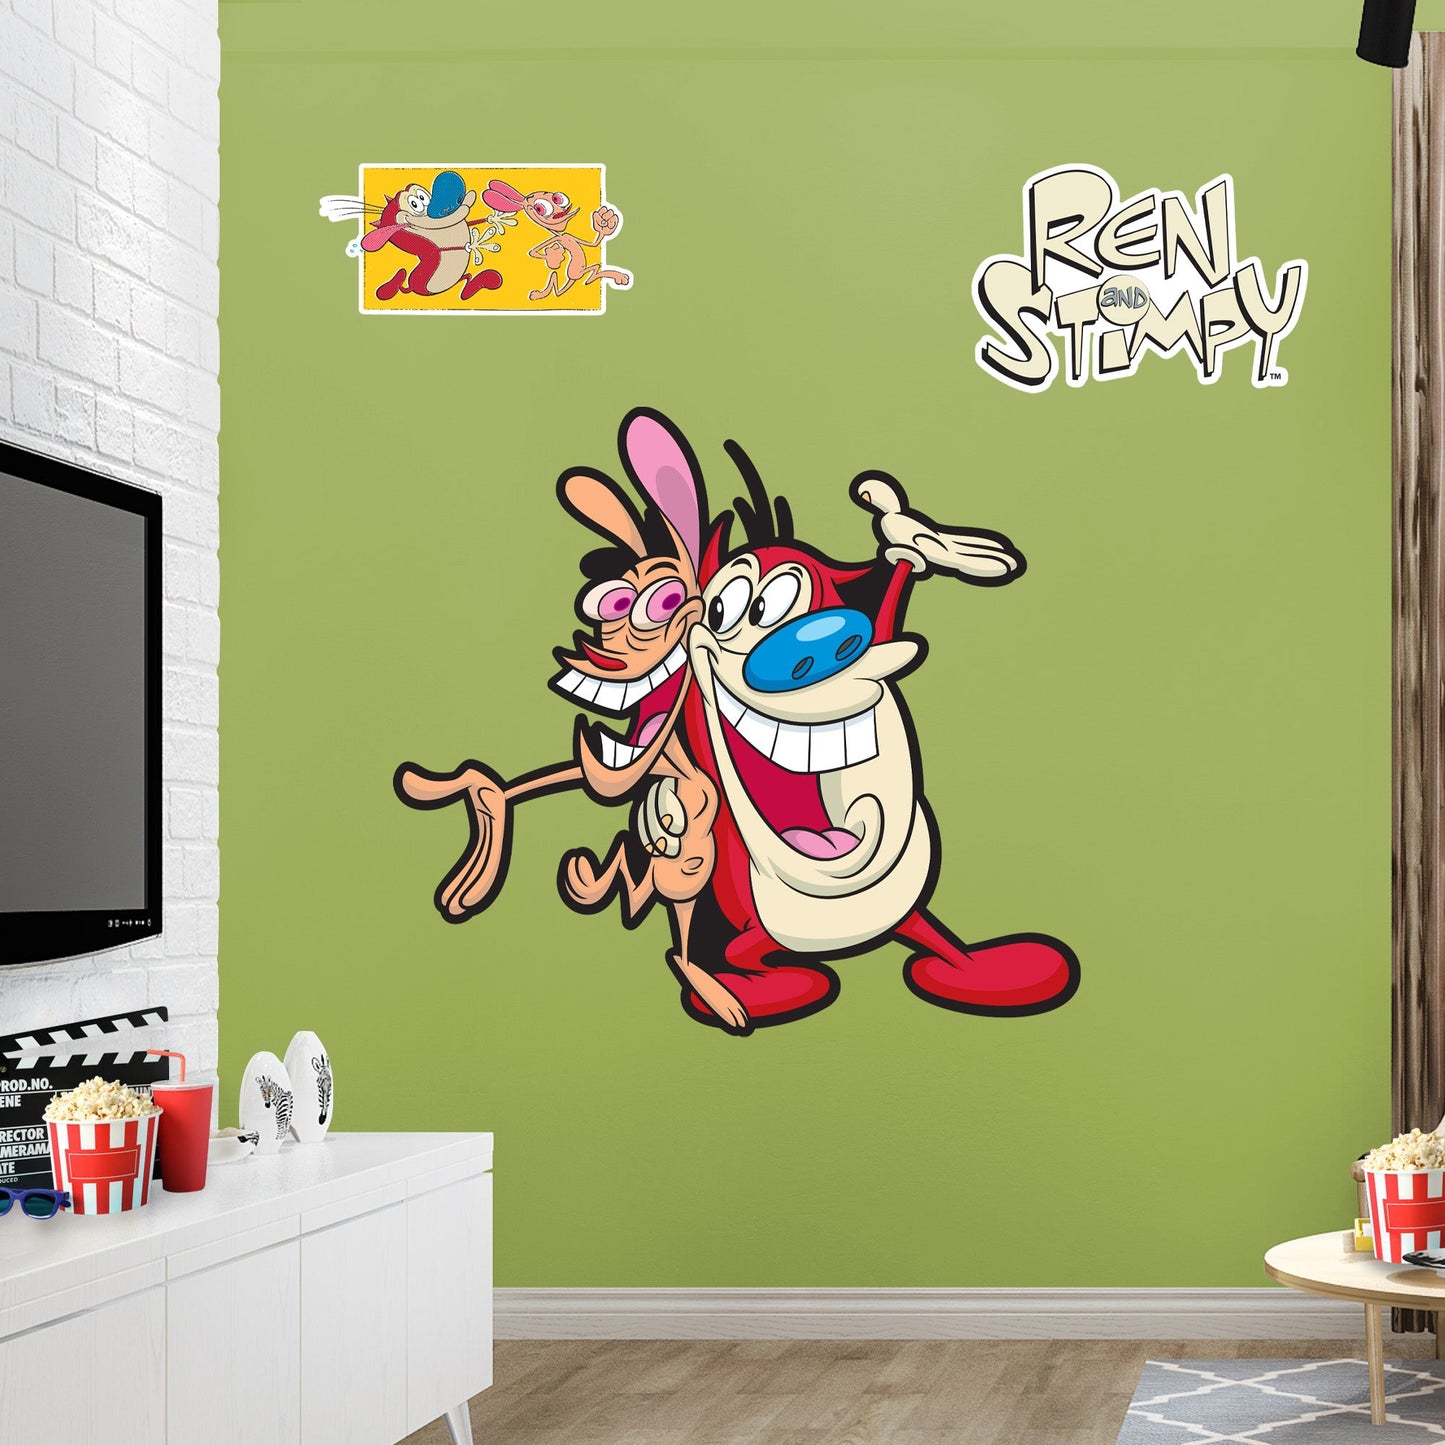 Ren and Stimpy: Ren & Stimpy Smiling RealBig - Officially Licensed Nickelodeon Removable Adhesive Decal